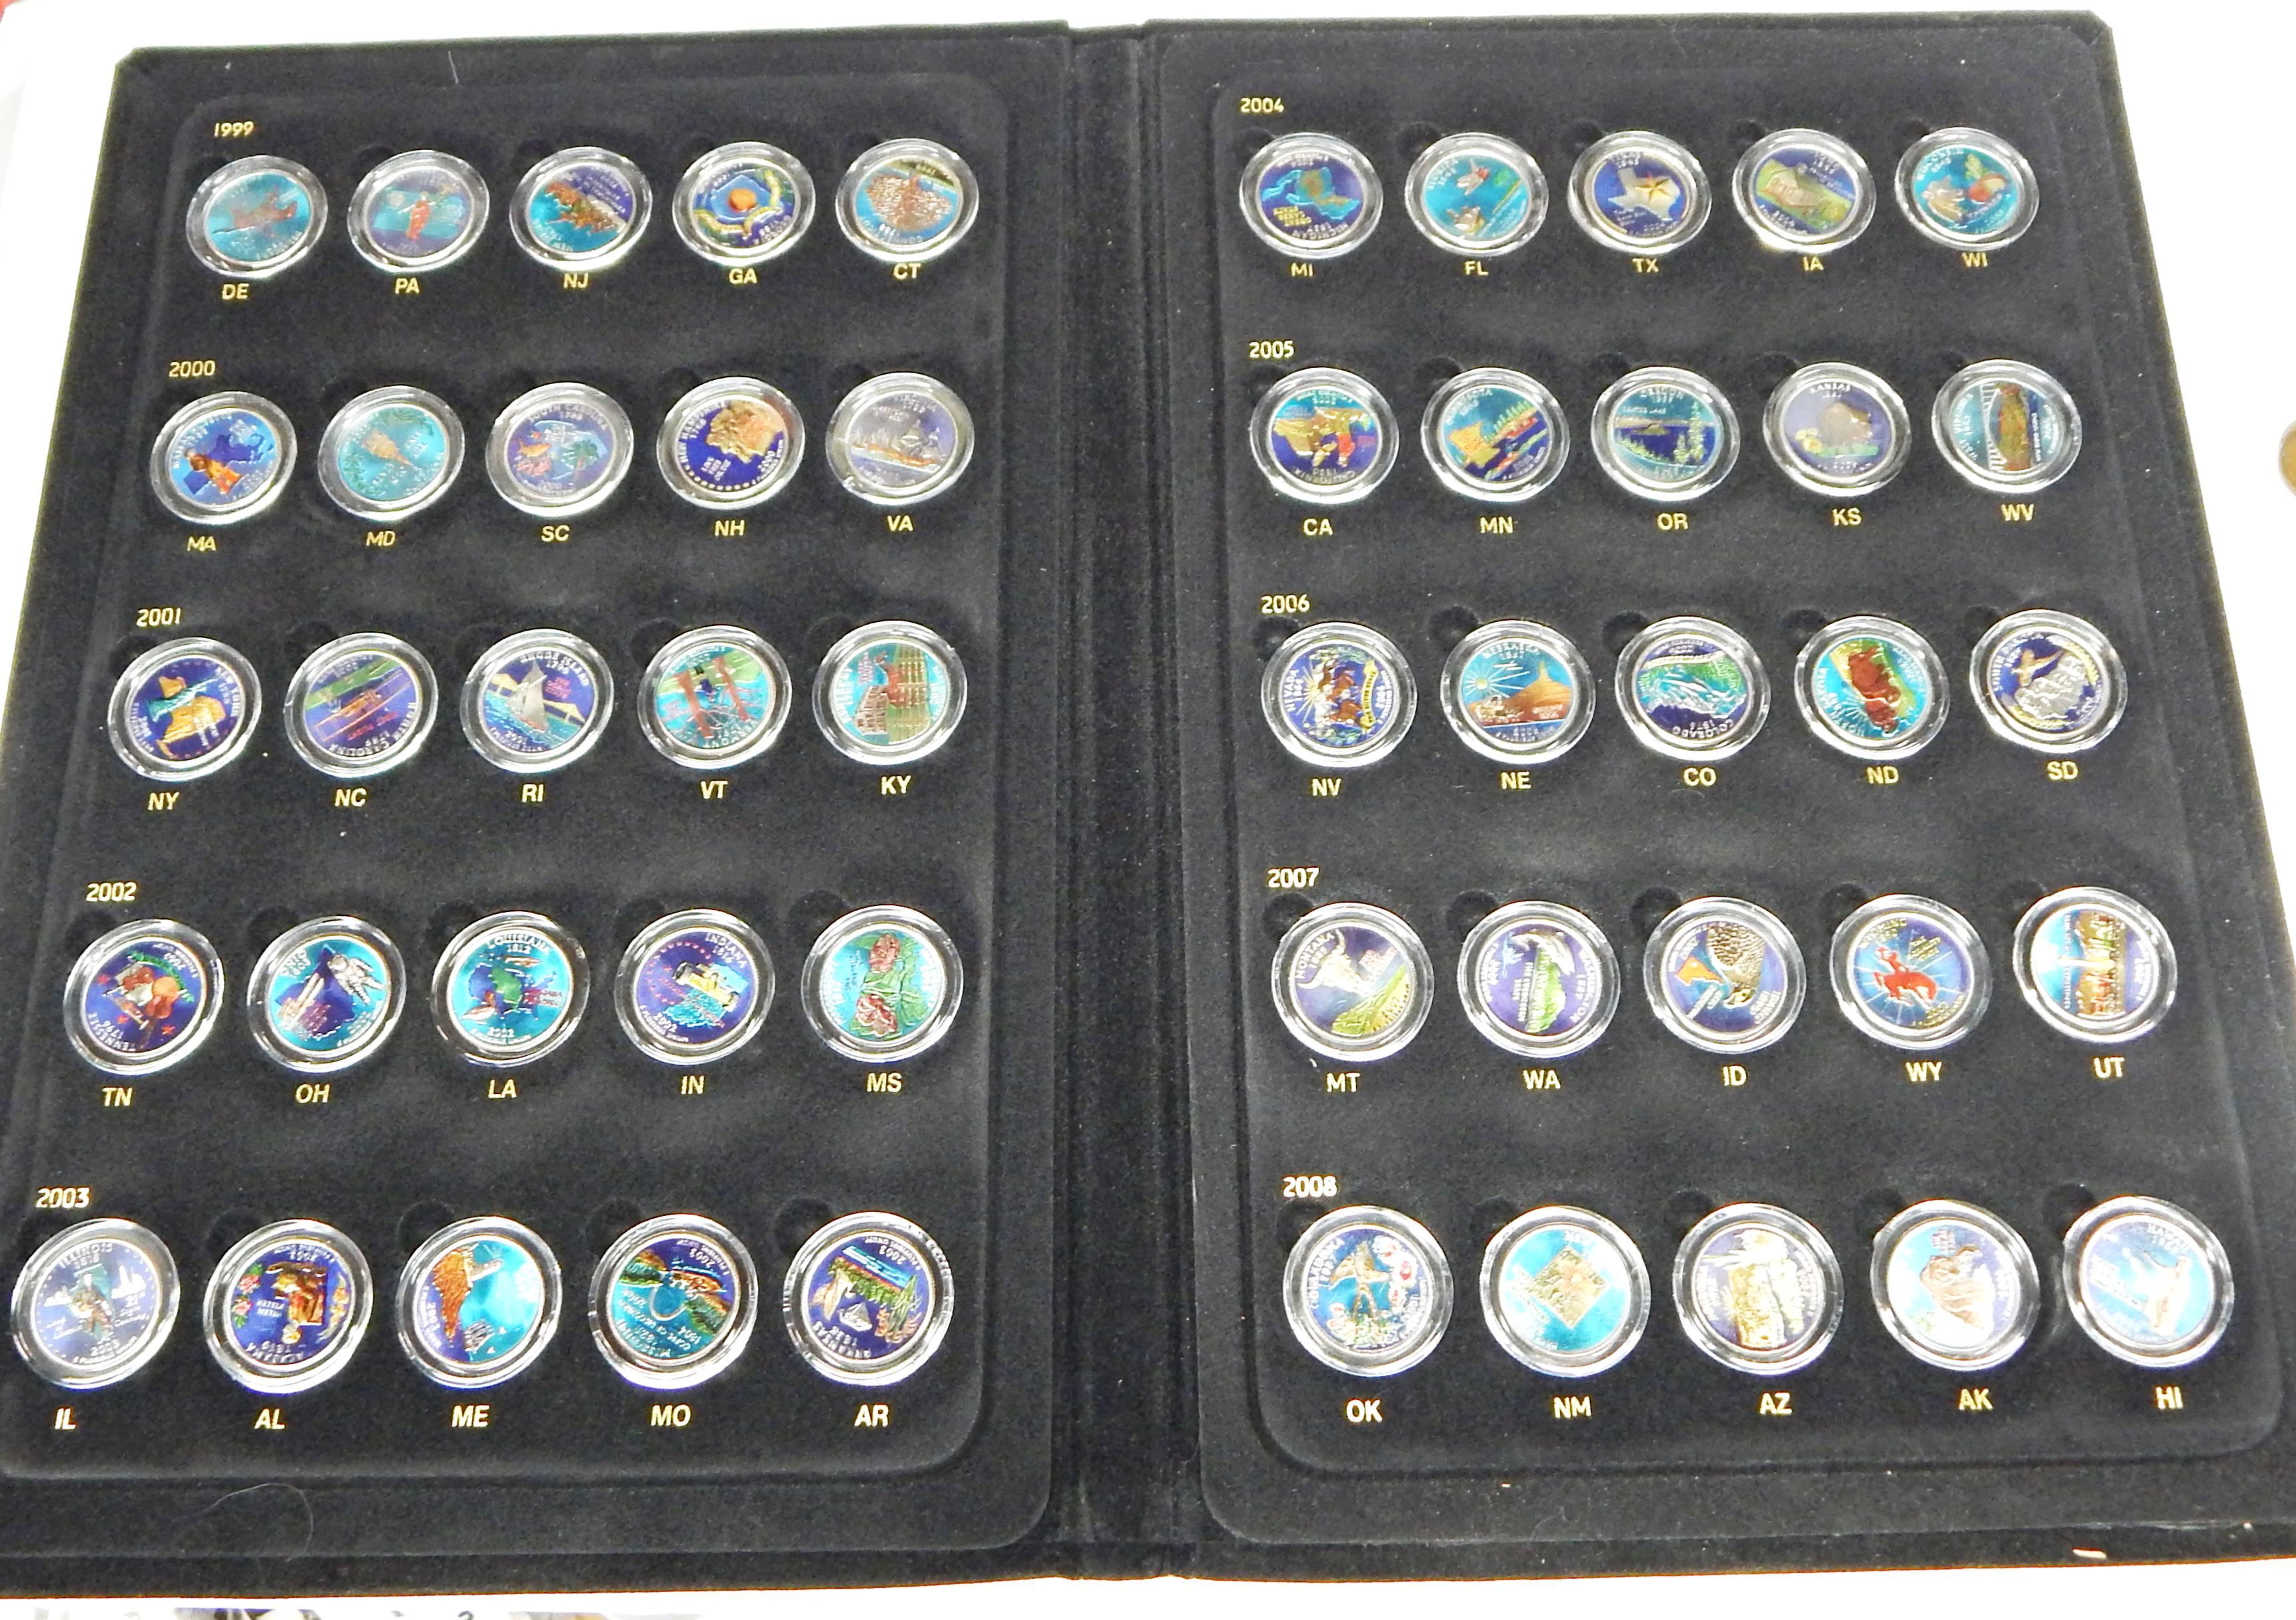 AMERICA'S NEW STATE QUARTER COLLECTION - 50 NICELY COLORIZED STATE QUARTERS